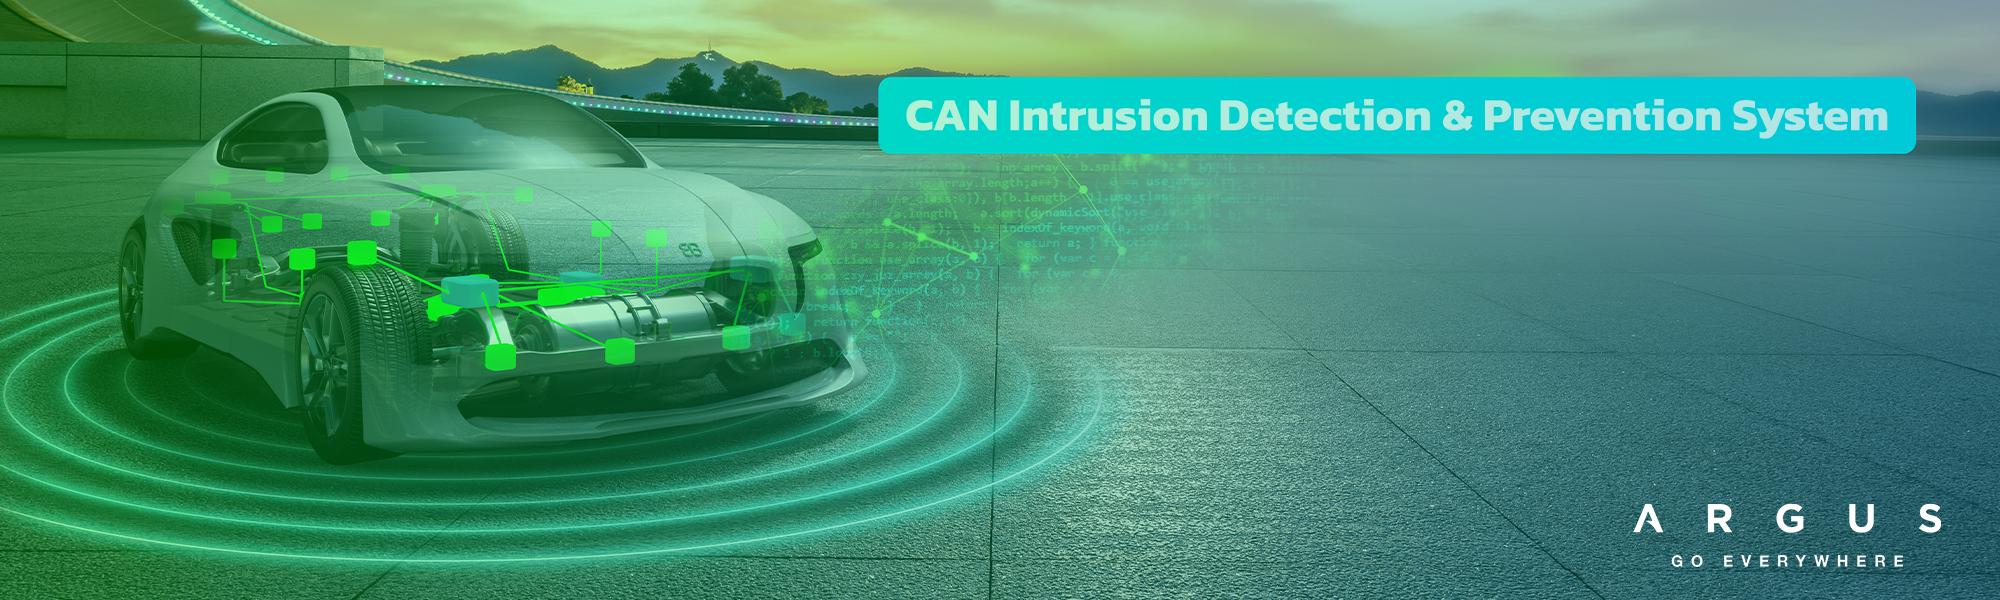 cybersecurity for CAN bus